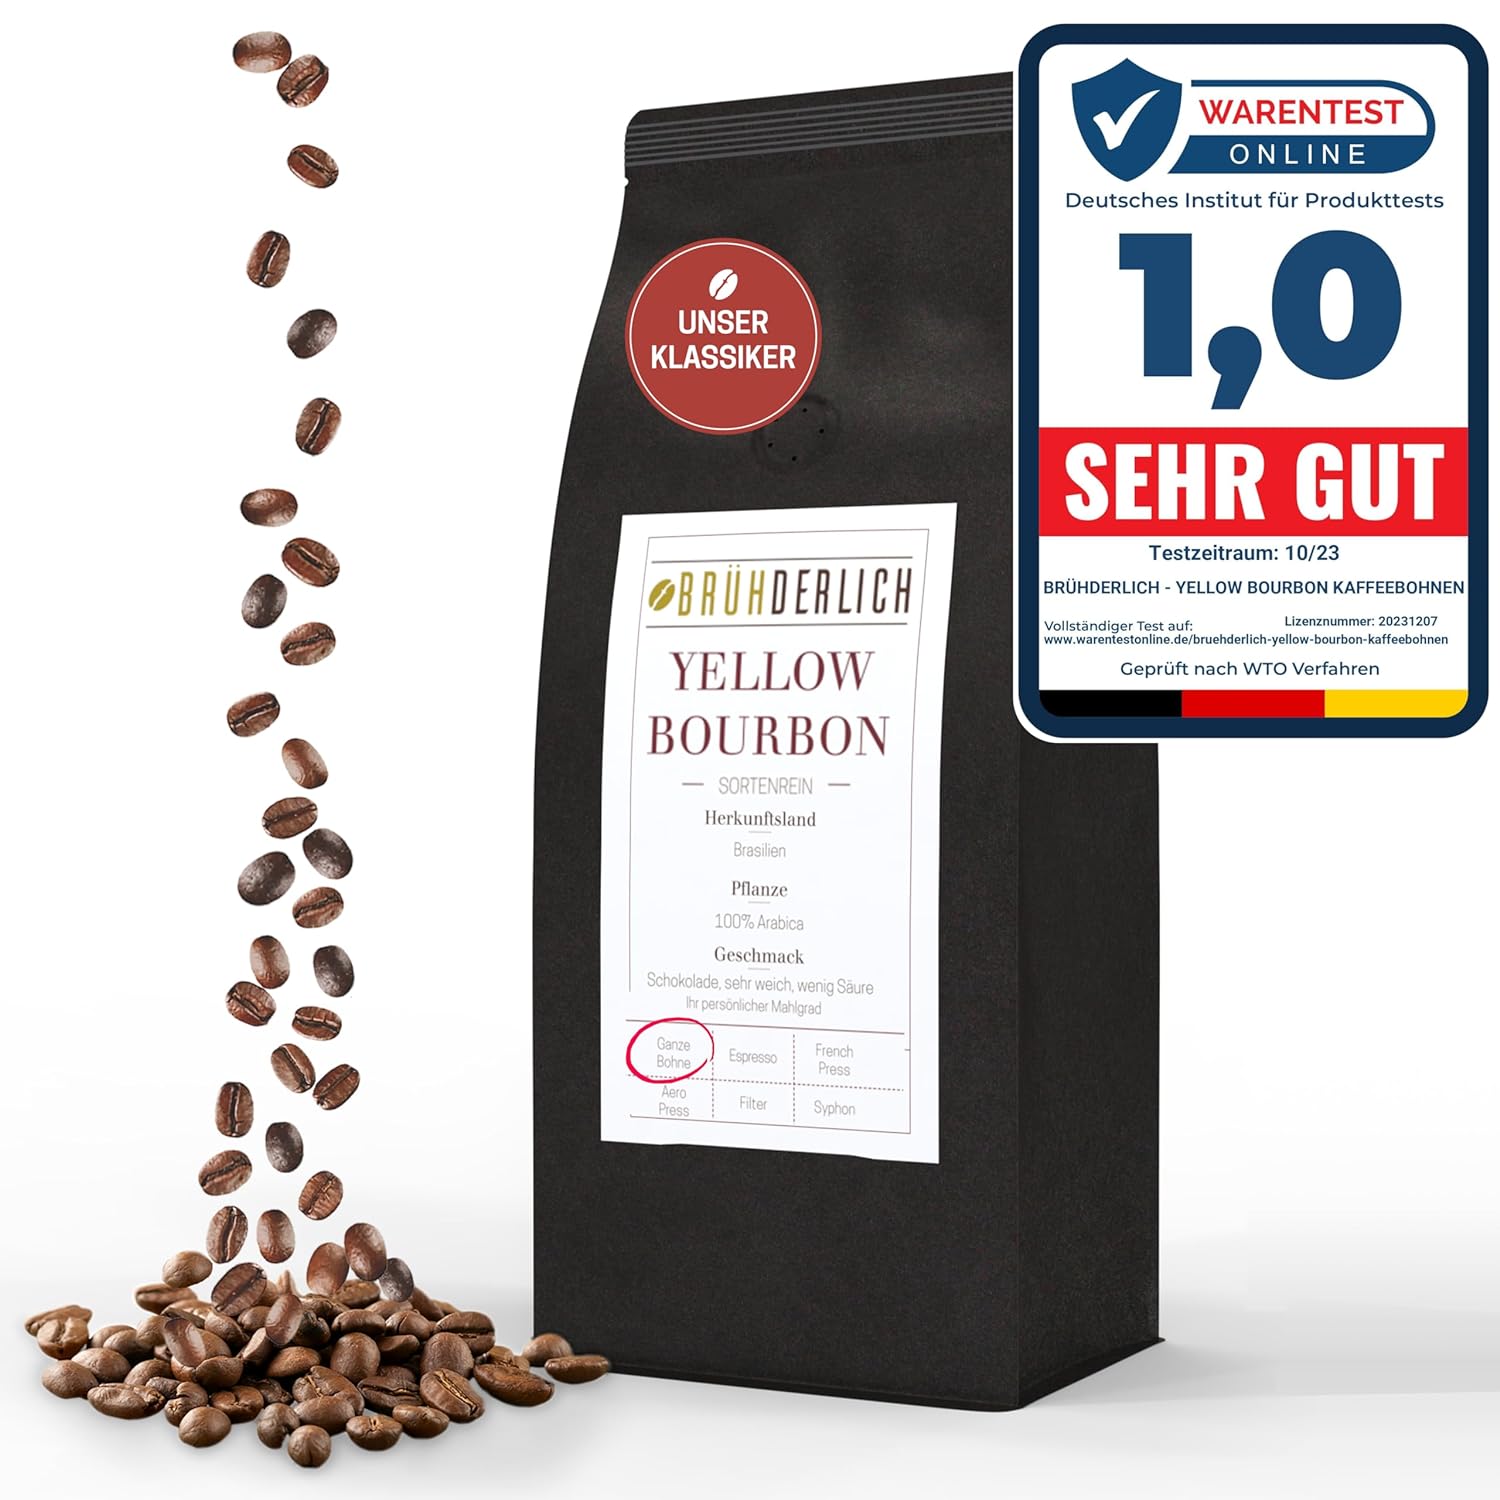 BRUHDERLICH Yellow Bourbon Premium Arabica Coffee Beans Low Acid (1 kg) - Special Coffee Beans from Brazil - Harmonious Base Sweet and Soft Aroma - Coffee Beans - Exceptionally Mild